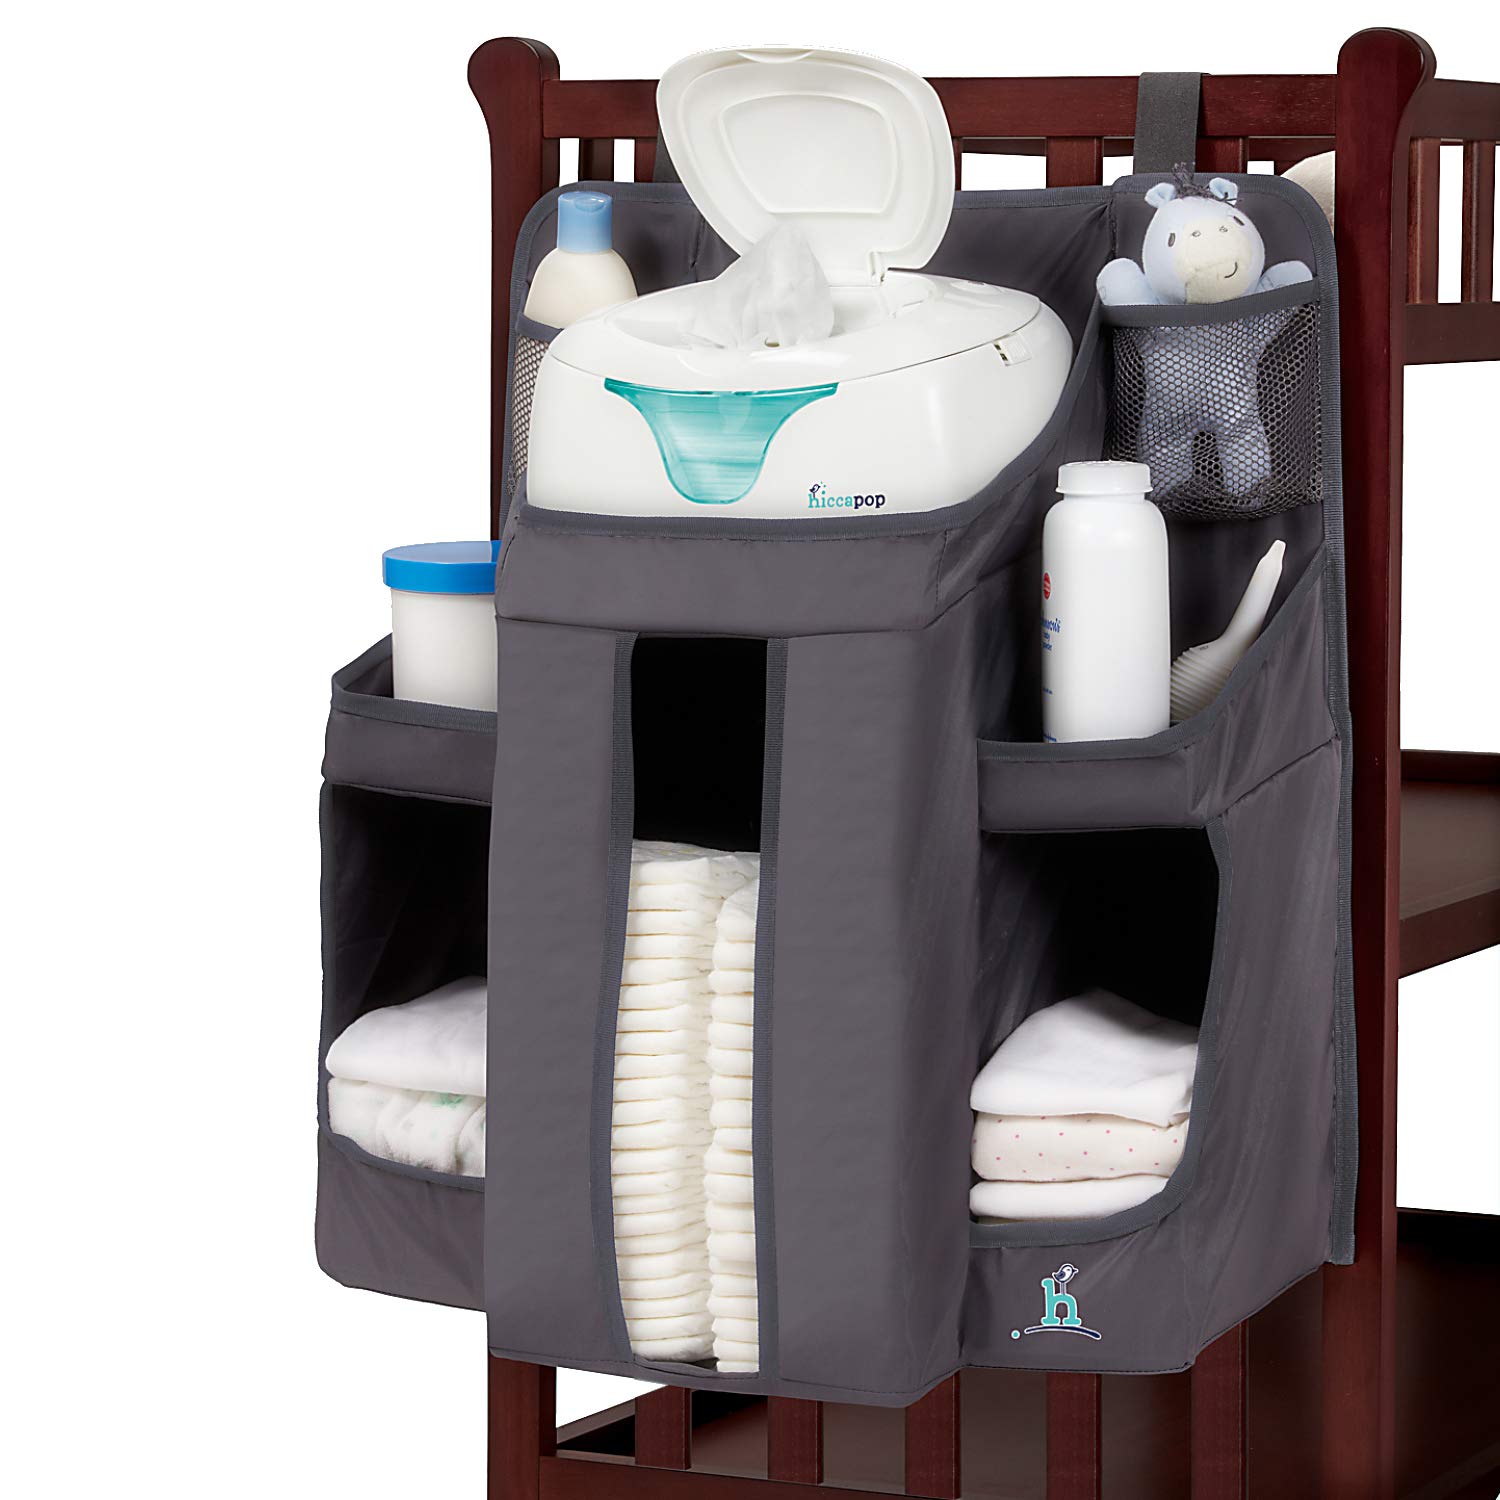 hiccapop Nursery Organizer and Baby Diaper Caddy